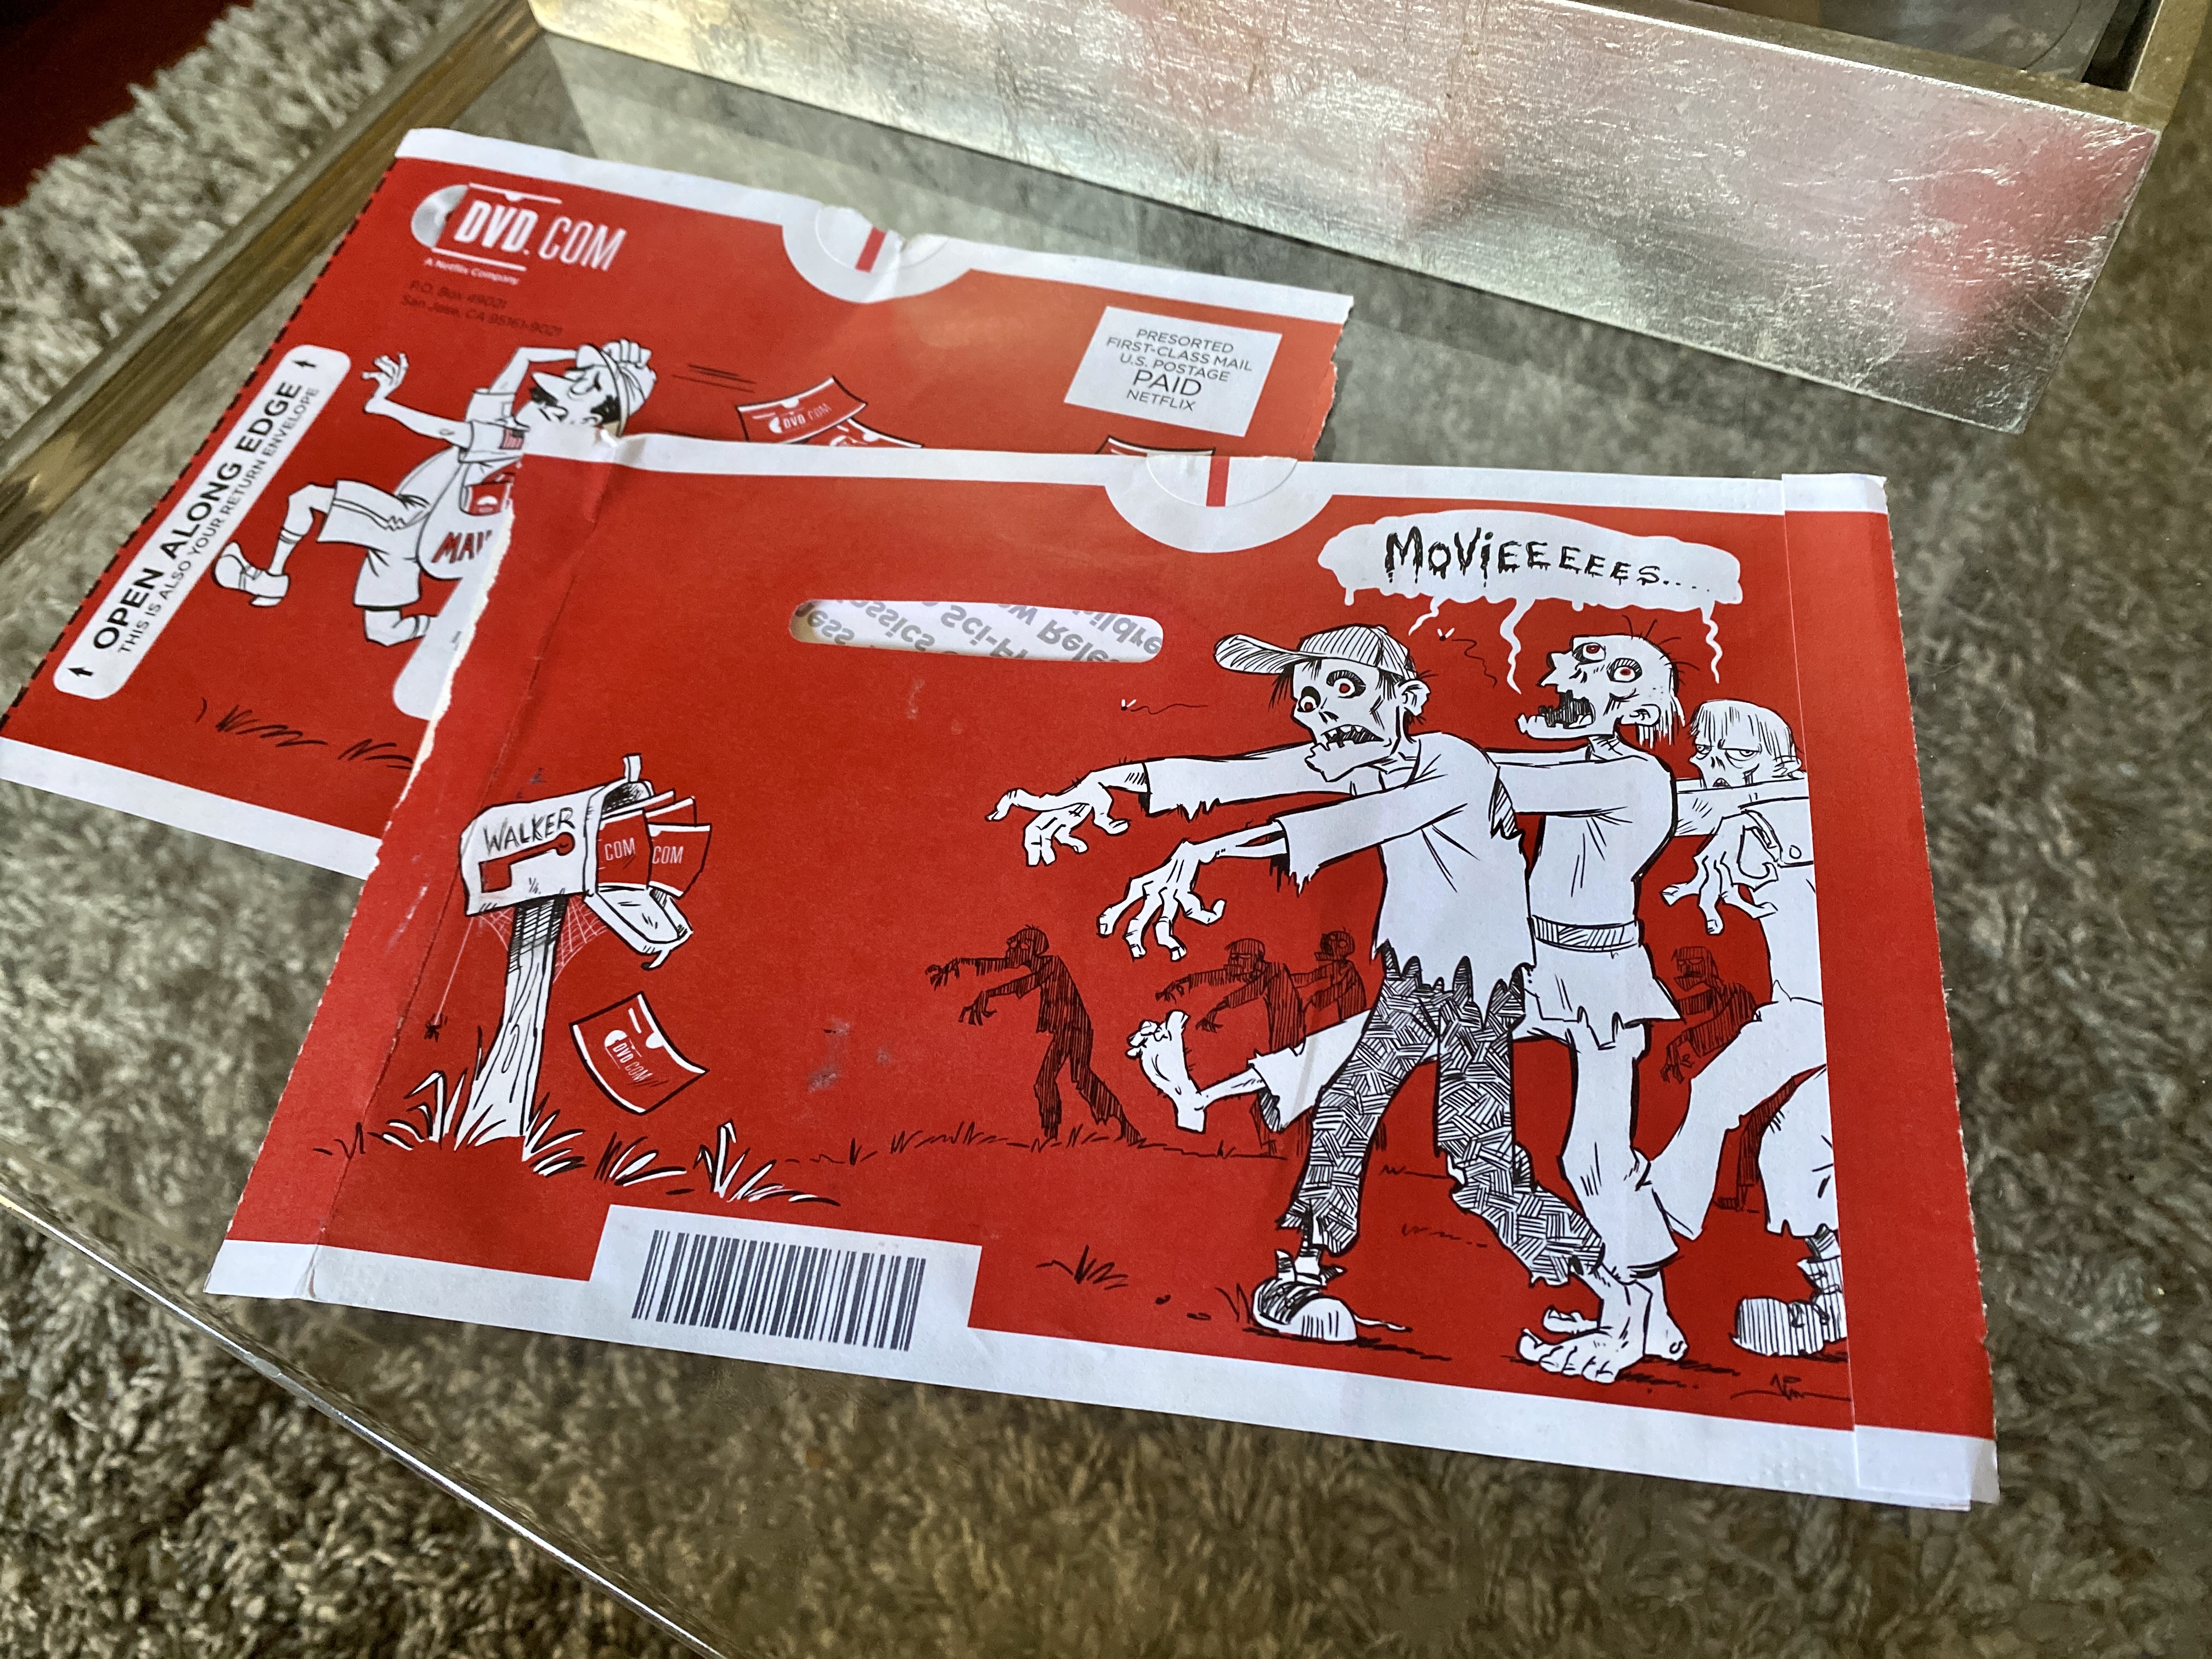 Red DVD.com mailing sleeve with a black and white cartoon illustration of zombies lumbering towards a mailbox filled with DVDs; a speech bubble above their heads says Movieeeees